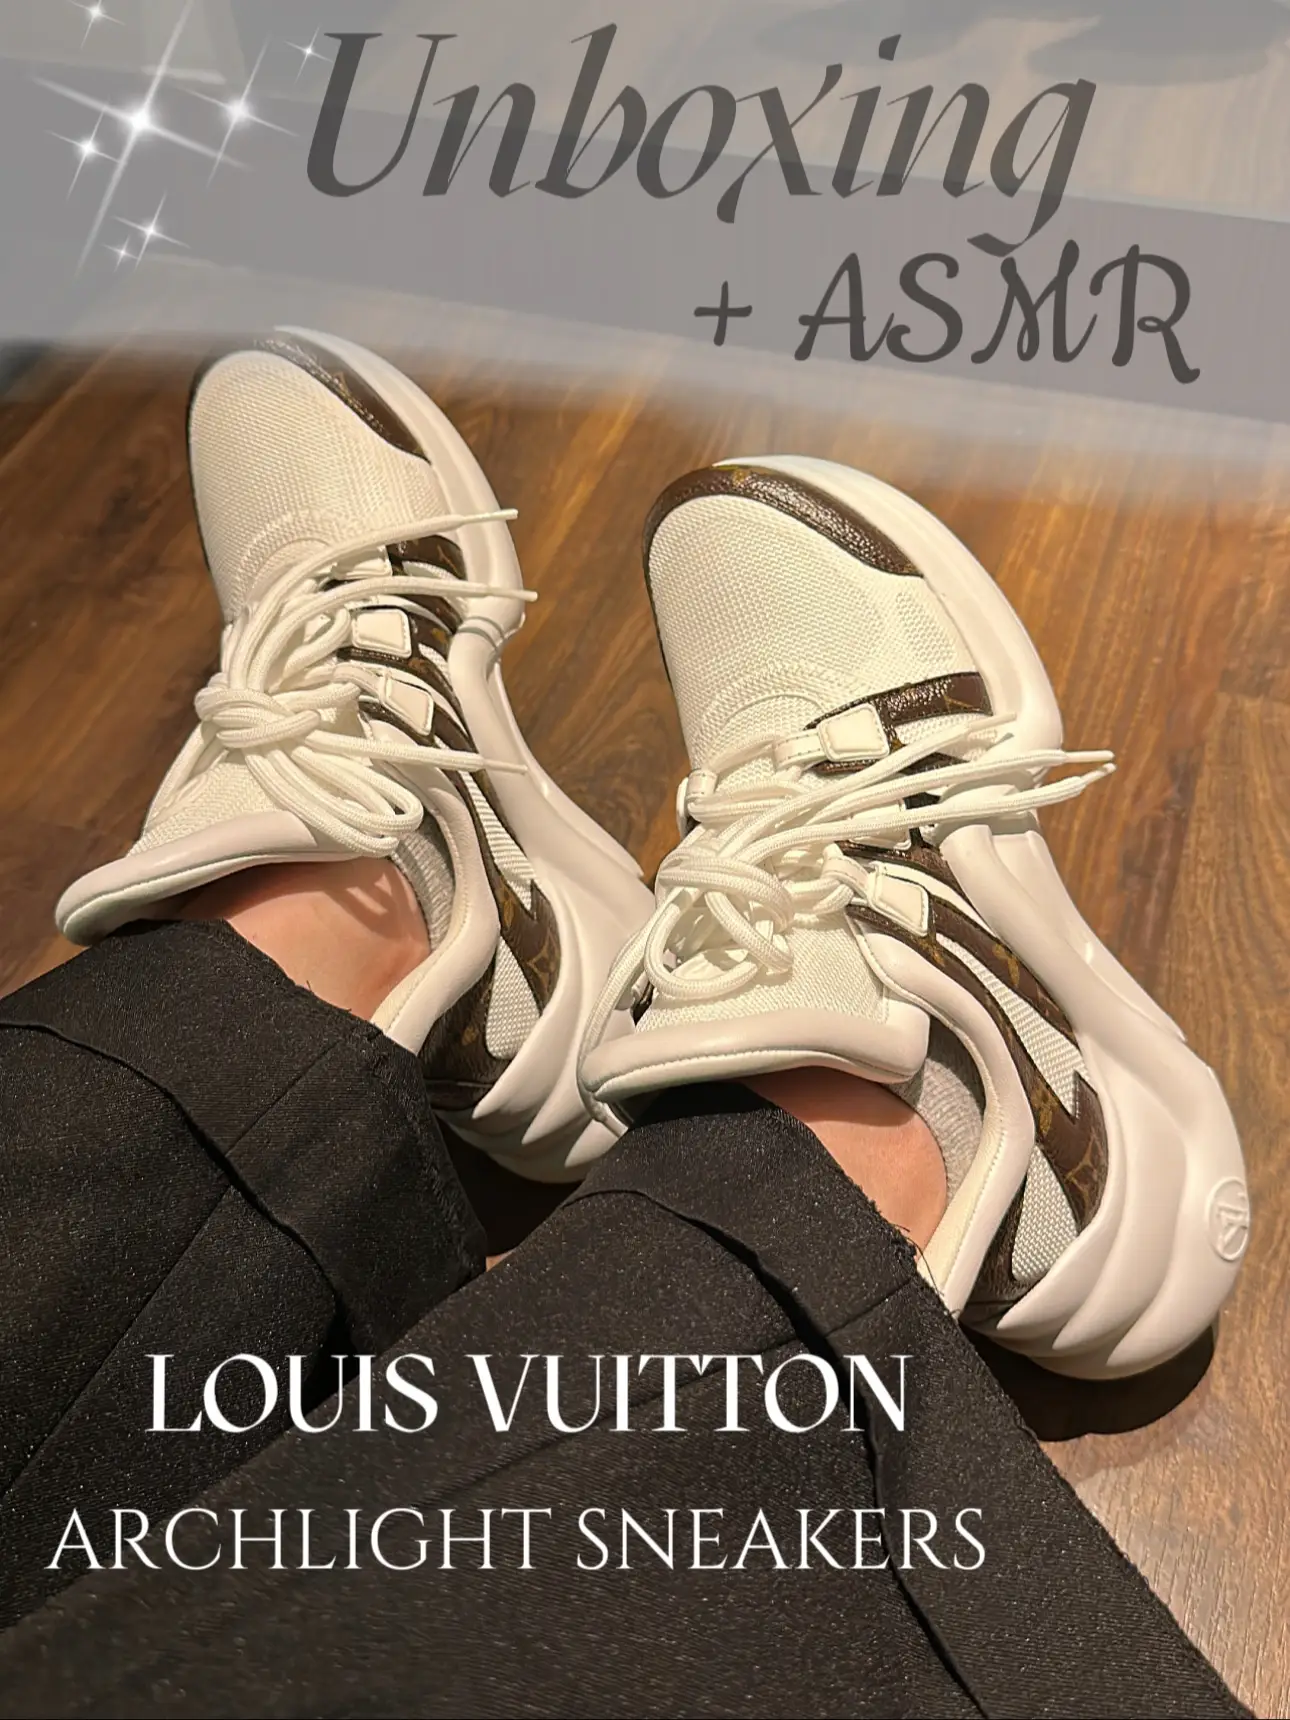 Unboxing and Review of Louis Vuitton's LV Archlight Sneakers